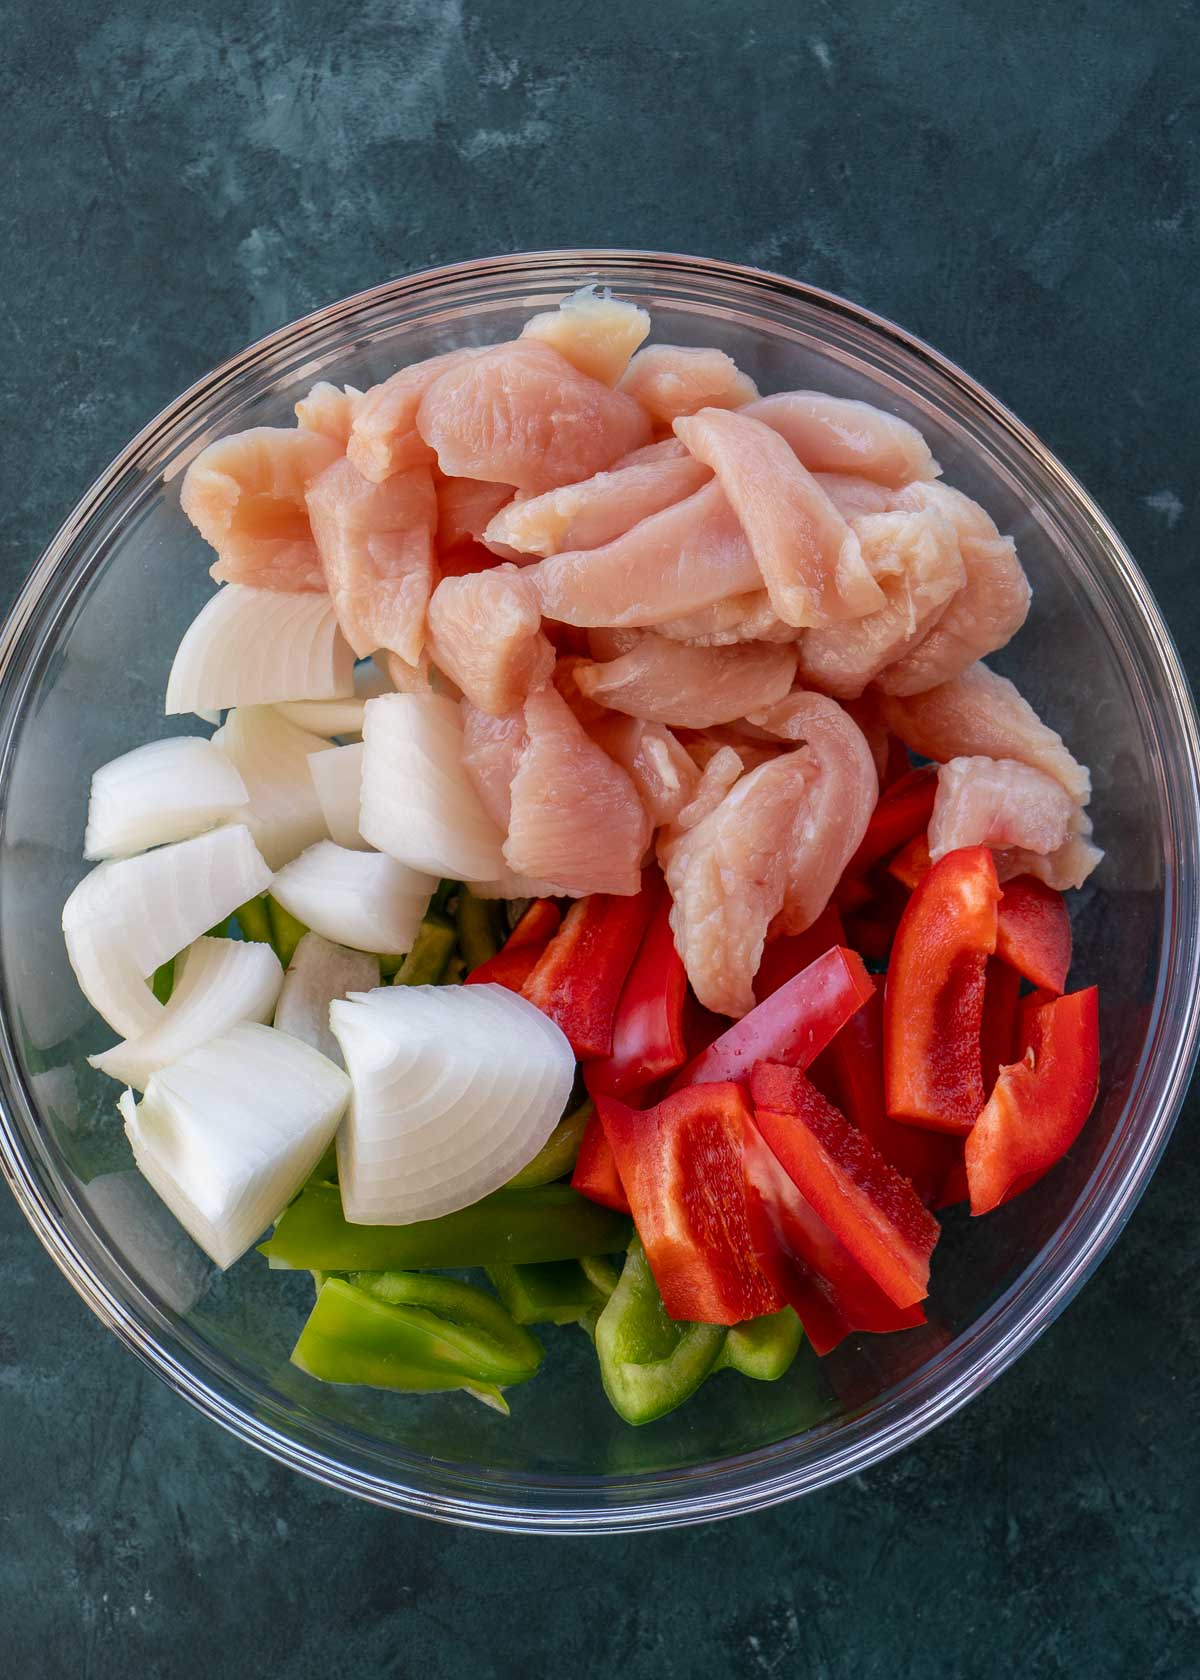 sliced chicken and vegetables in mixing bowl.